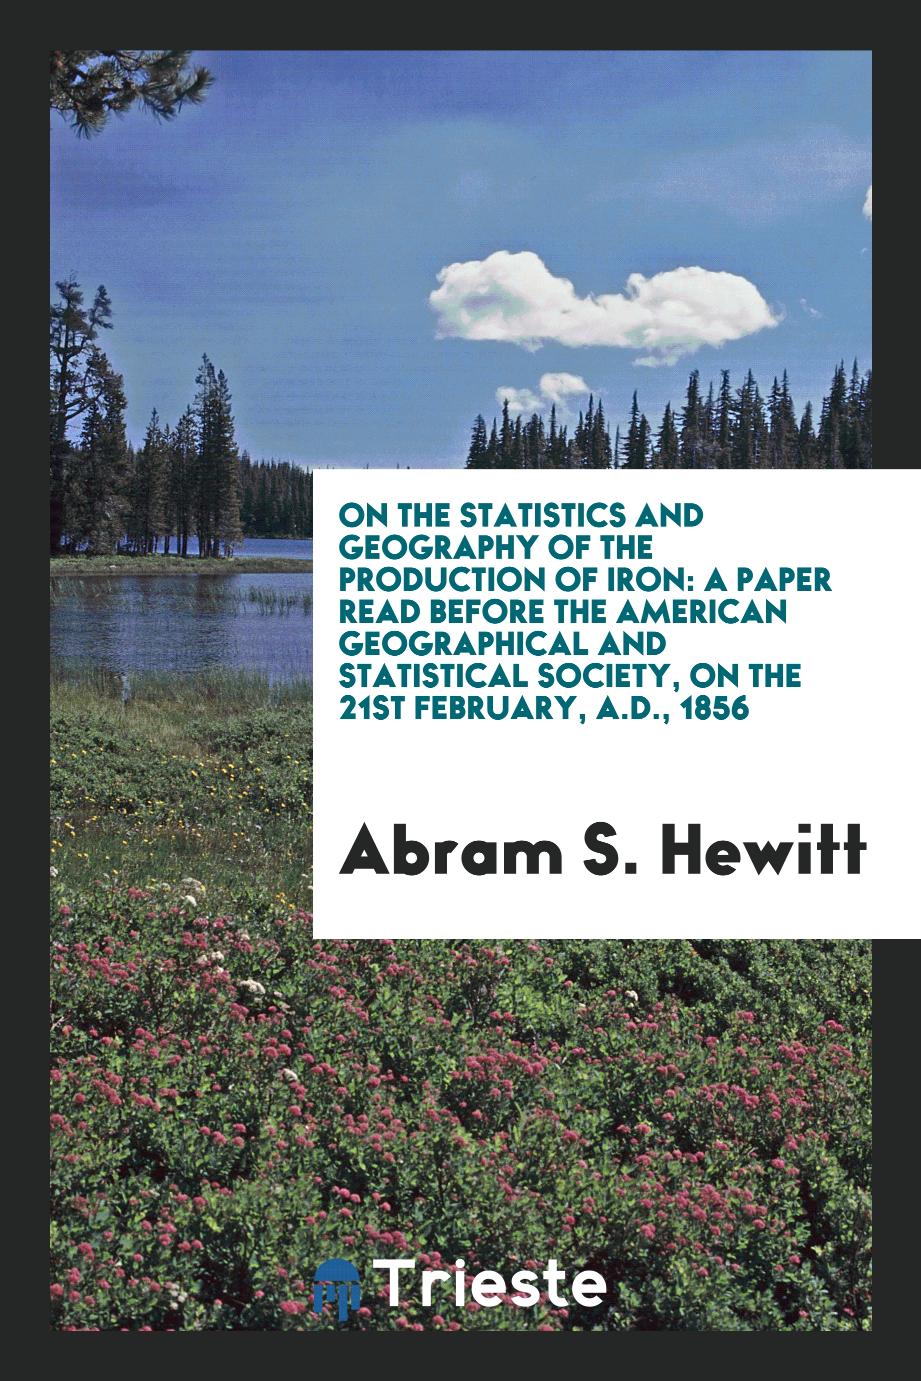 On the statistics and geography of the production of iron: a paper read before the American geographical and statistical society, on the 21st February, A.D., 1856